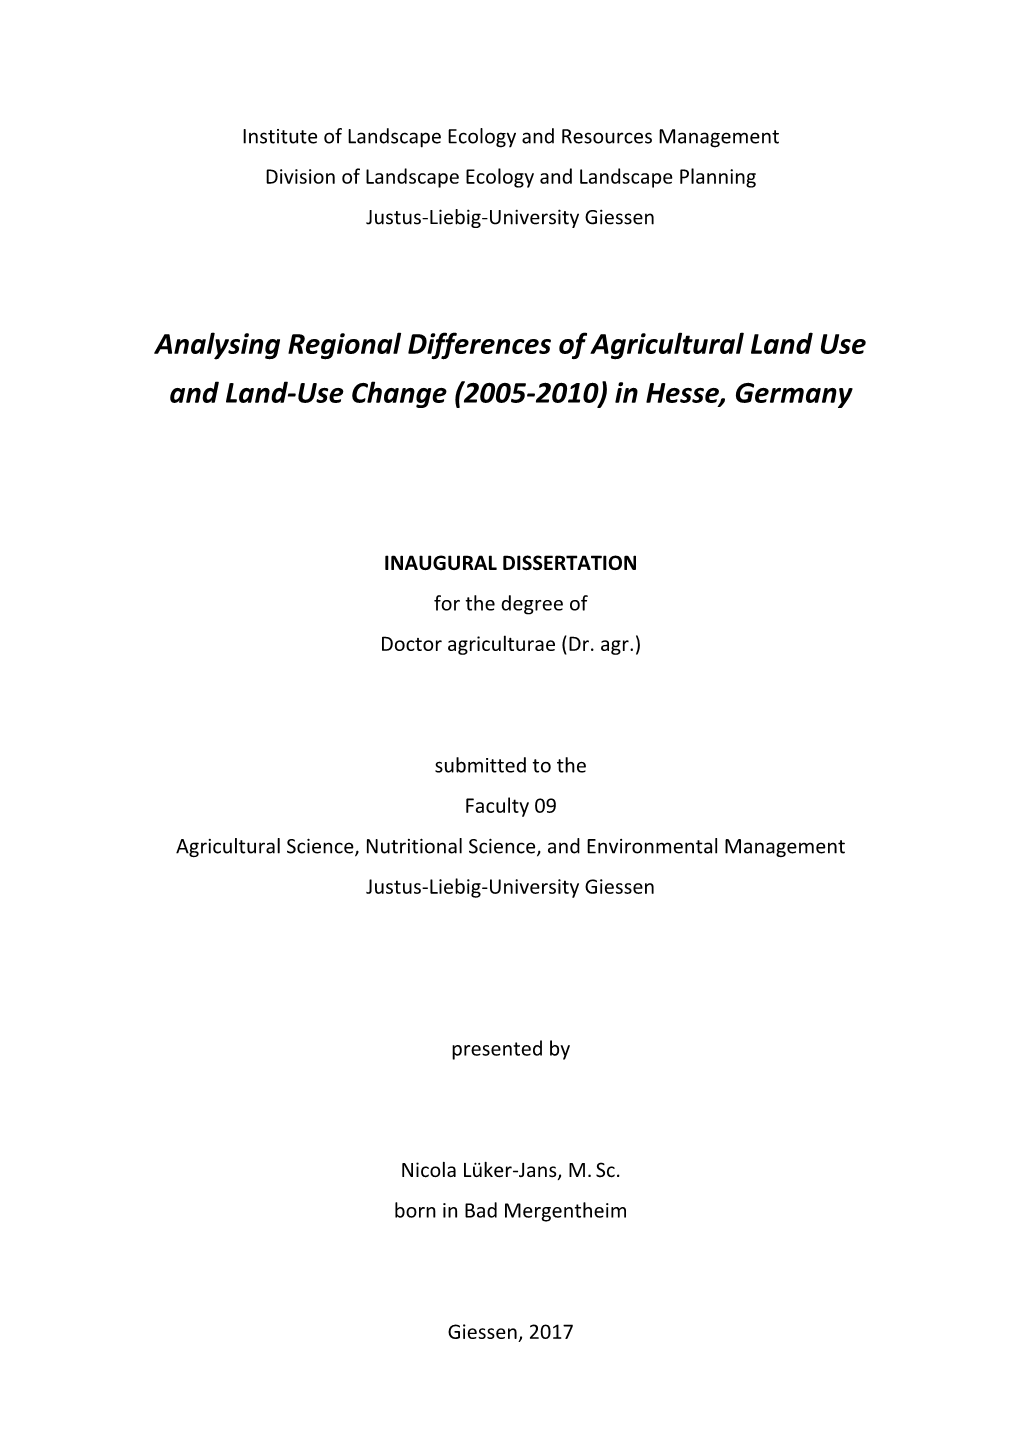 Analysing Regional Differences of Agricultural Land Use and Land-Use